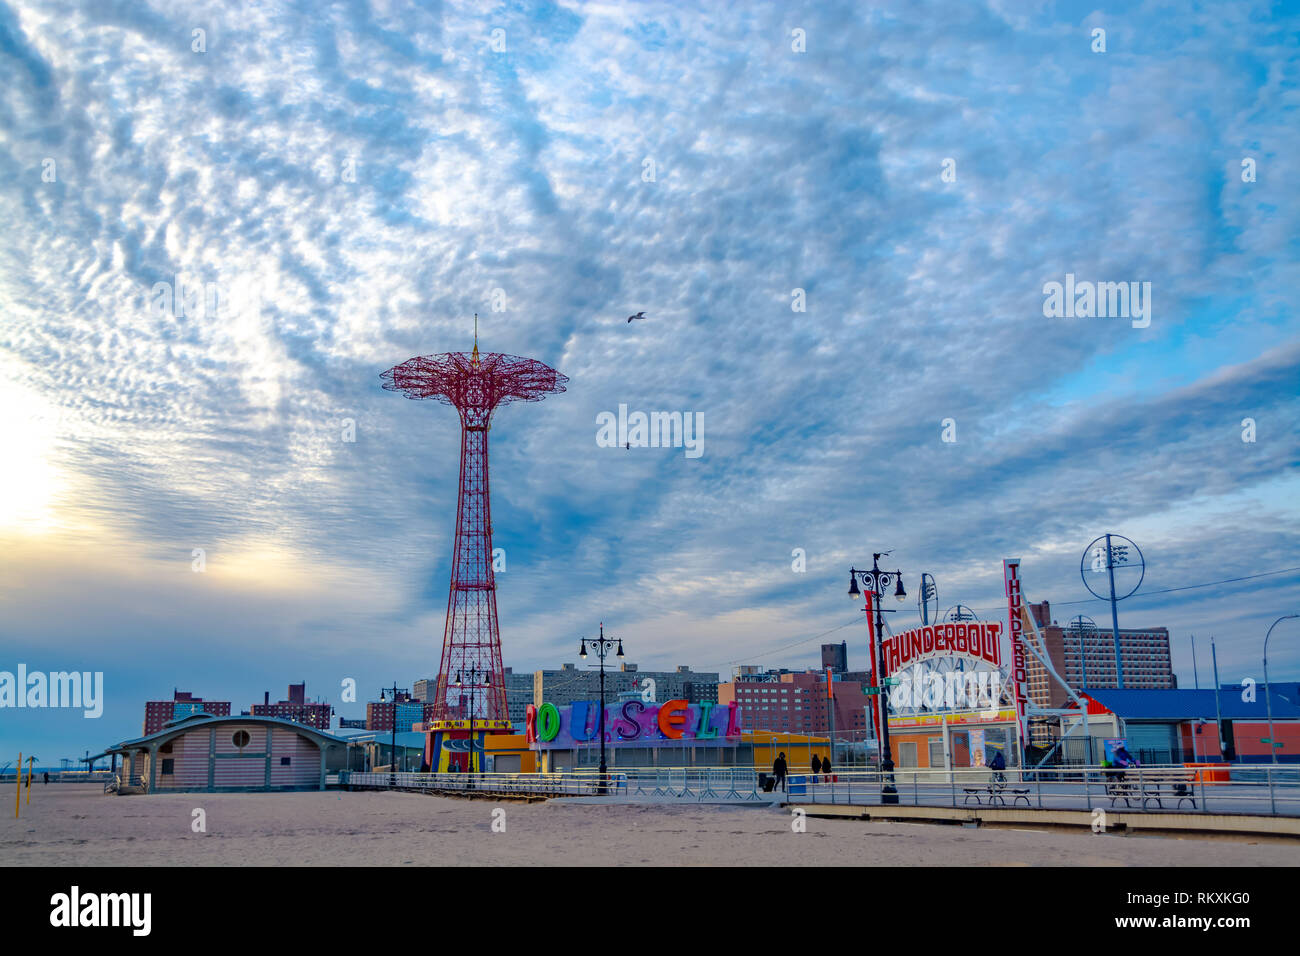 Parachute jump tower in Coney Island Brooklyn and beautiful blue sky and clouds. Stock Photo